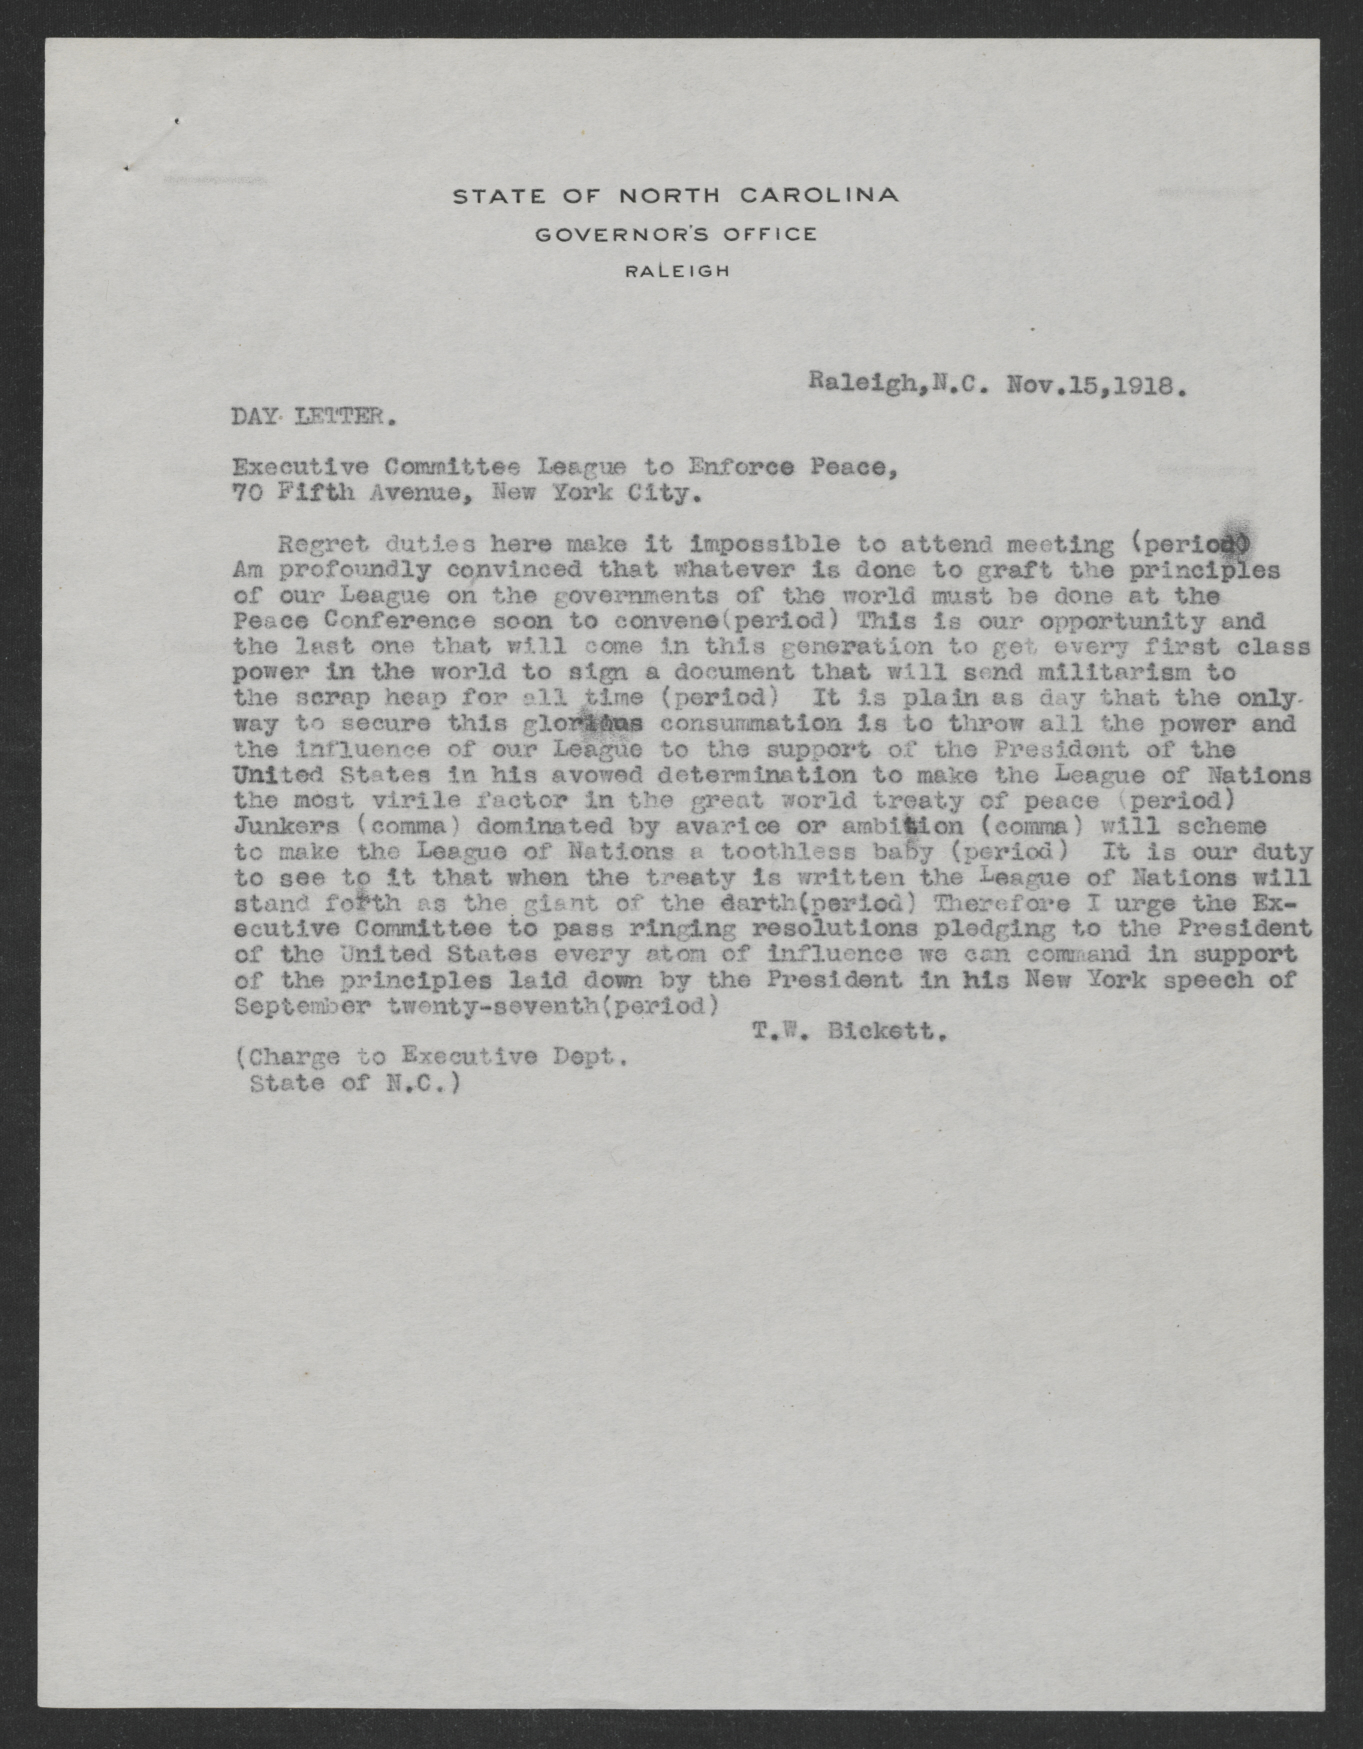 Copy of Telegram from Thomas W. Bickett to the Executive Committee of the League to Enforce Peace, November 15, 1918